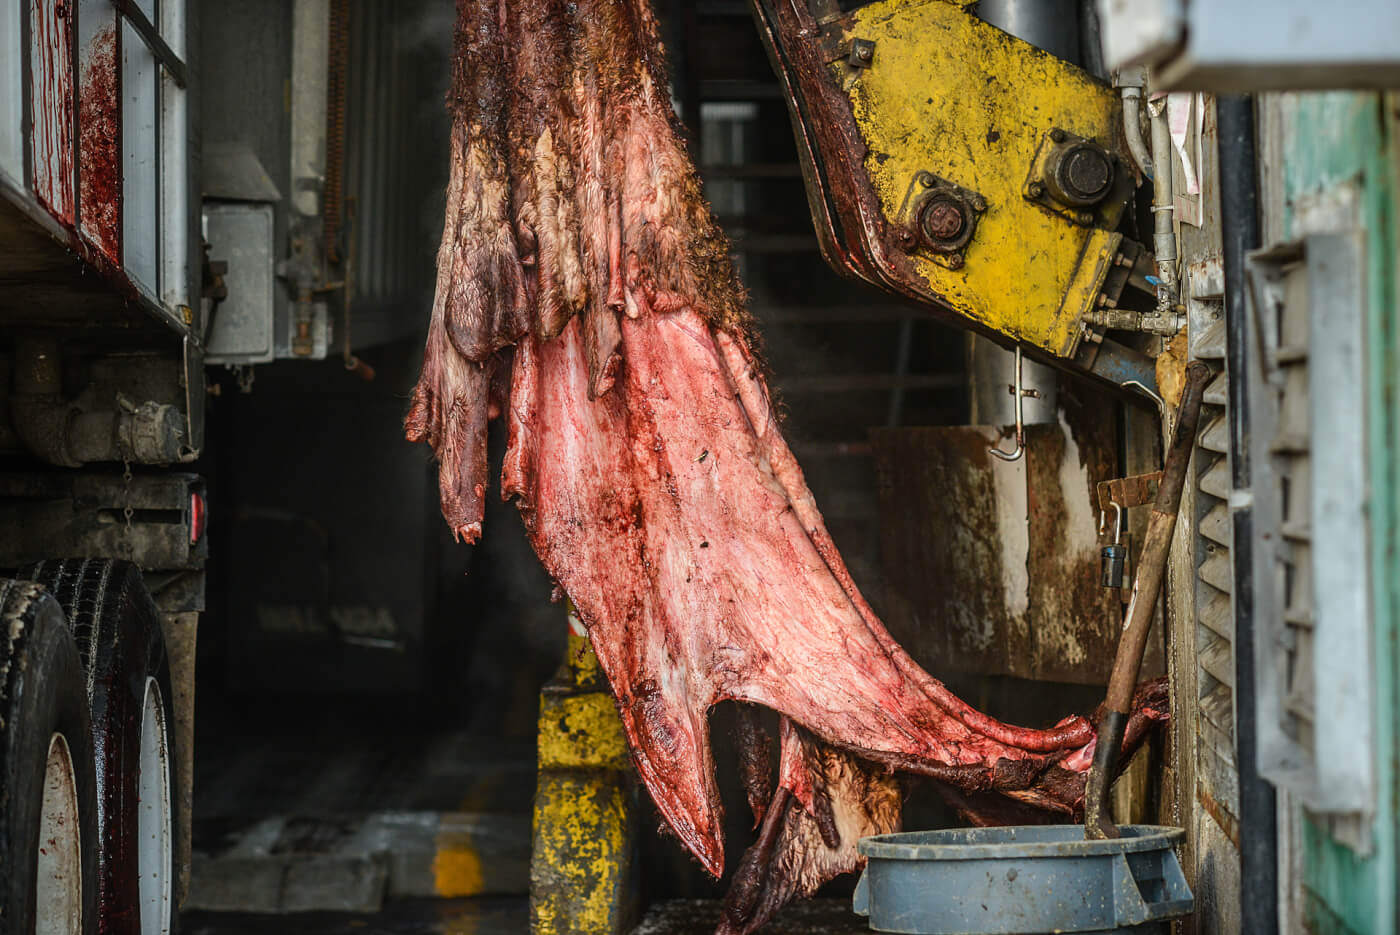 The steaming skins of cows are mechanically lifted from the slaughterhouse into a transport truck.